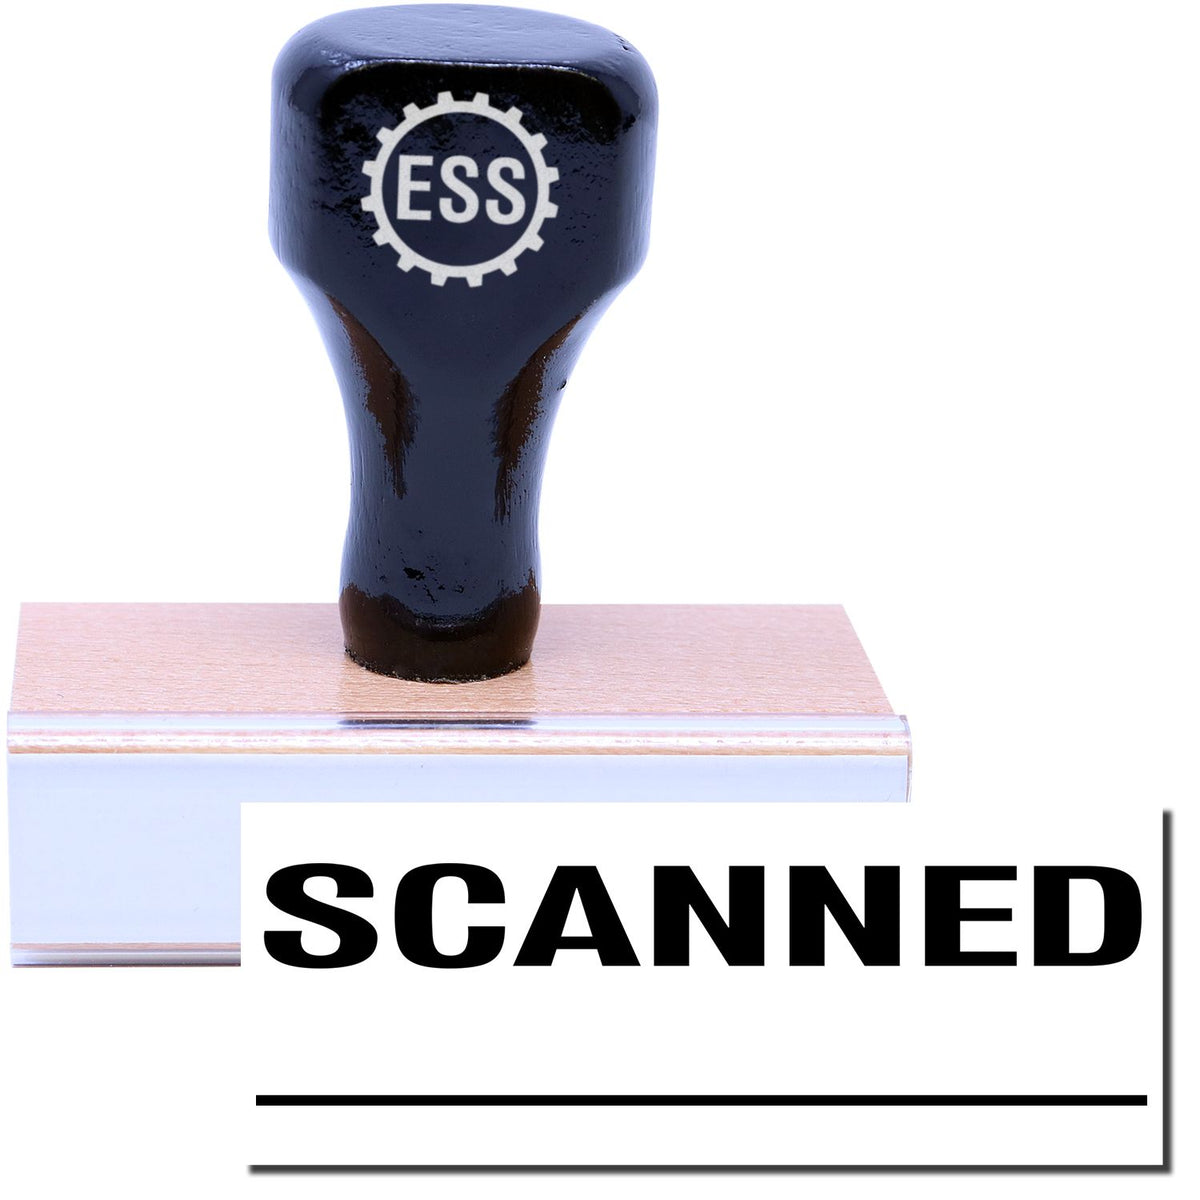 A stock office rubber stamp with a stamped image showing how the text &quot;SCANNED&quot; in a large font with a line underneath the text is displayed after stamping.